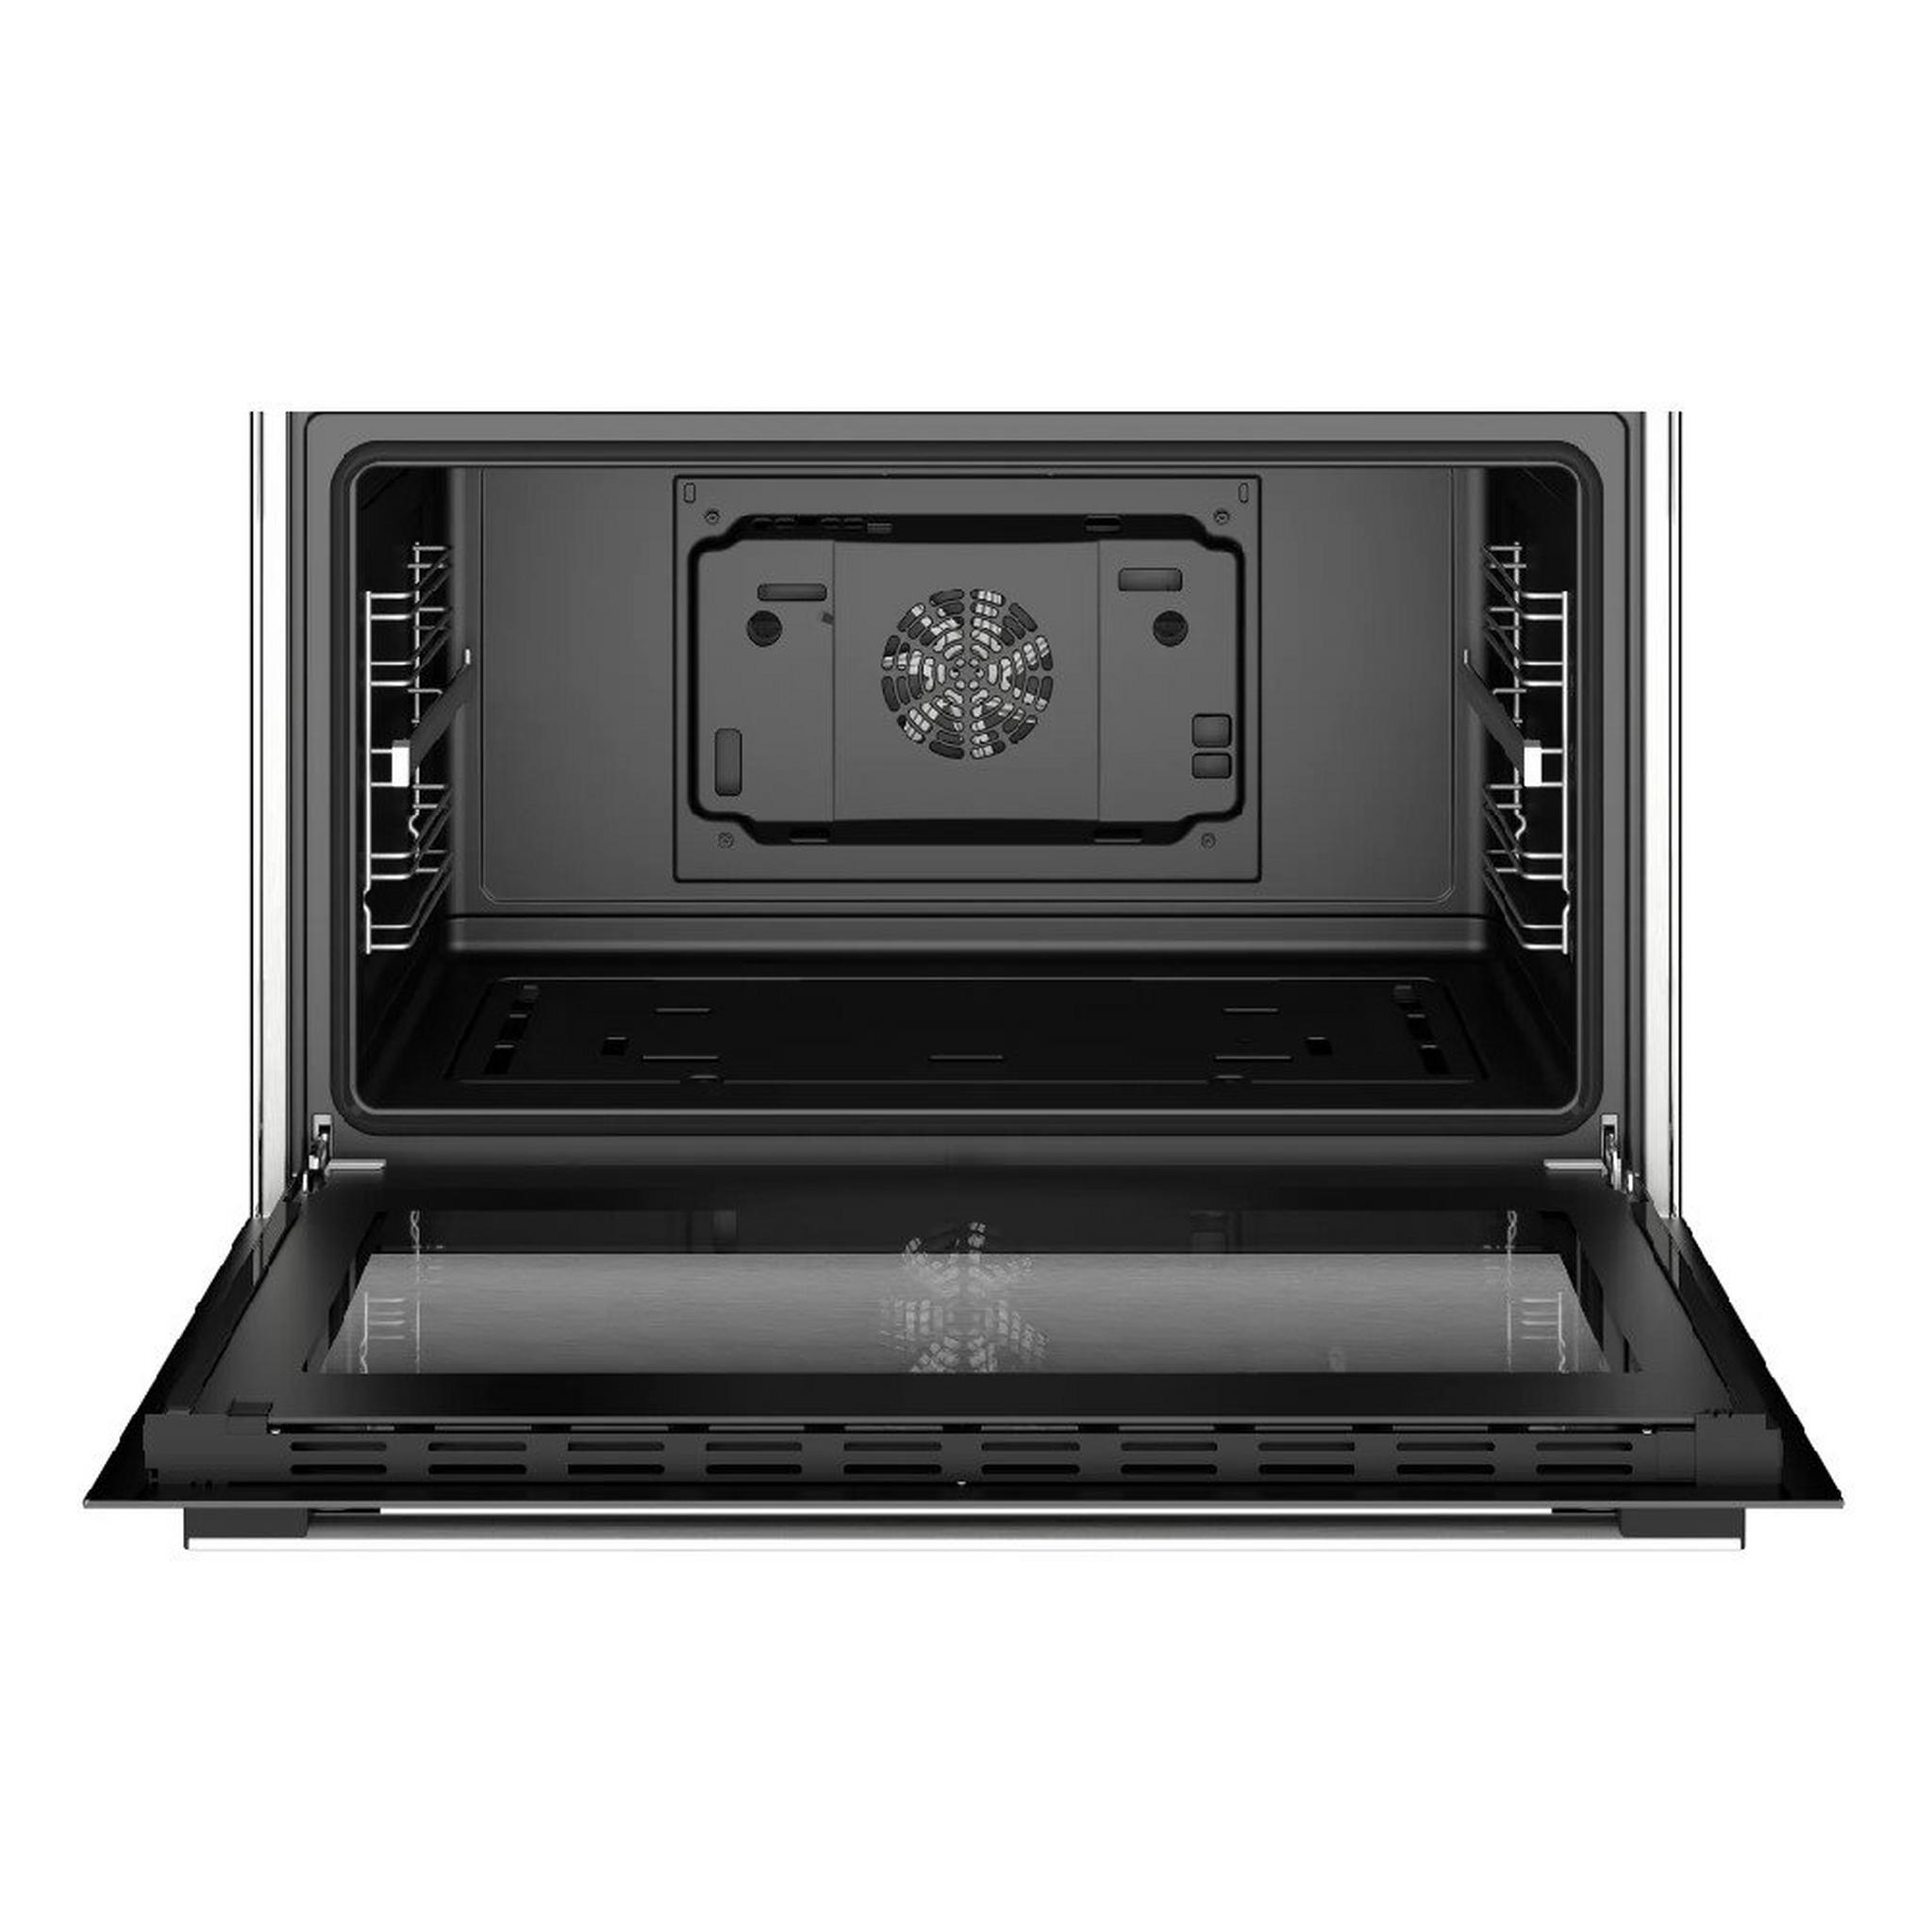 Bosch 5 Burners Gas Cooker, 90x60, HIZ5G7W50M - Stainless Steel